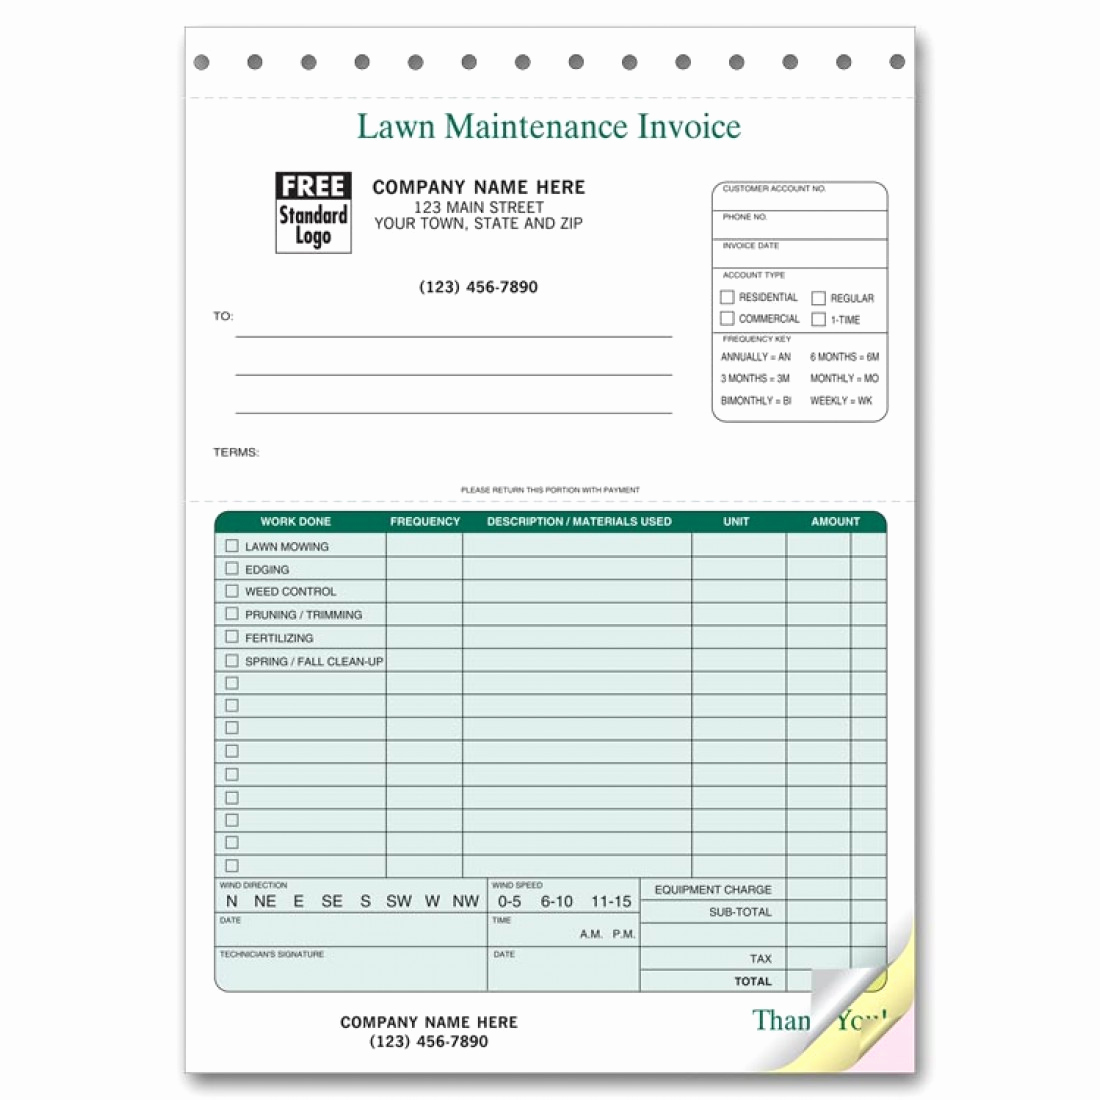 Lawn Care Invoice Template Pdf Elegant Professional Invoices Lawn Maintenance Invoices 123 at